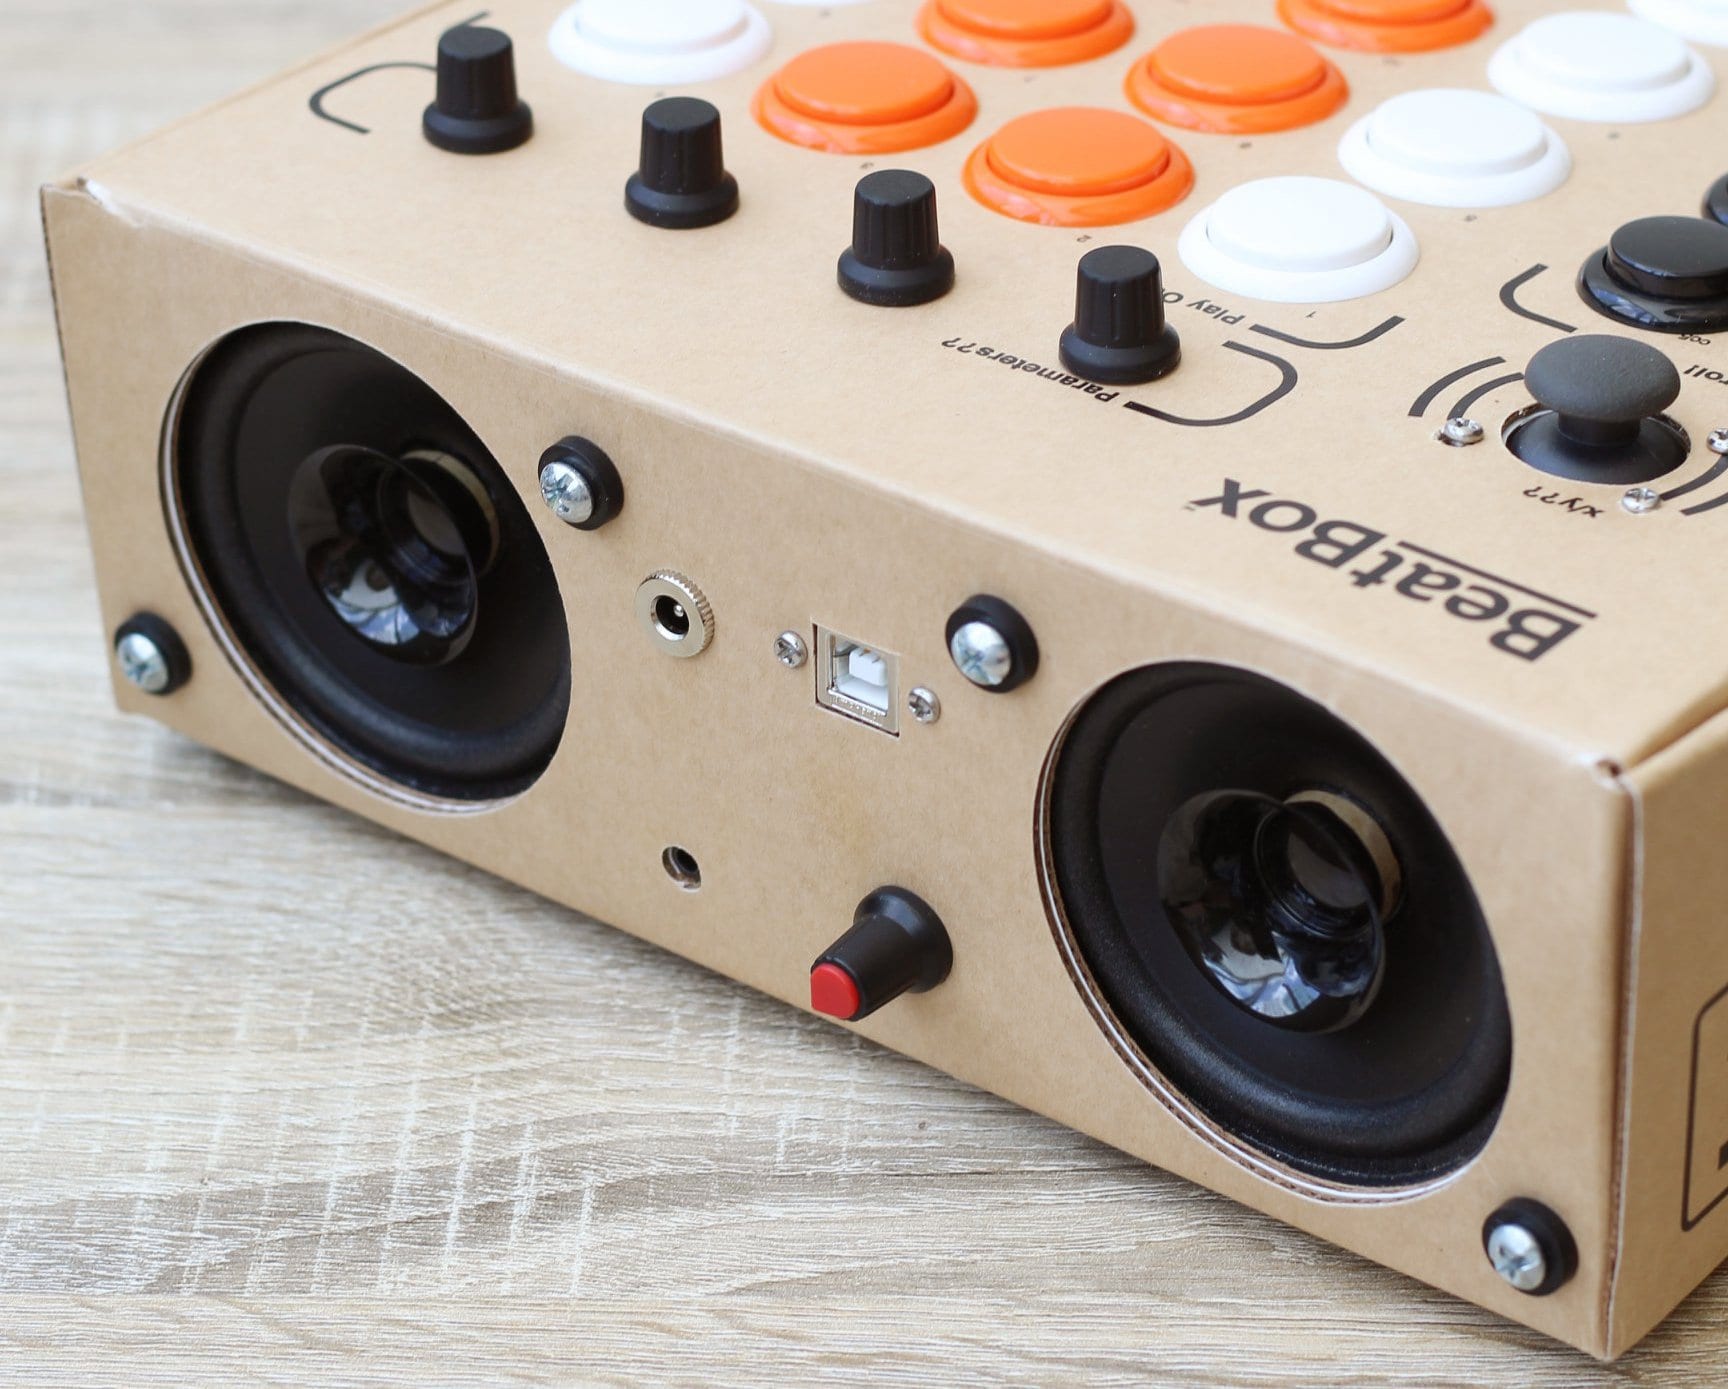 BeatBox by Rhythmo: Check out this DIY drum machine in a cardboard 